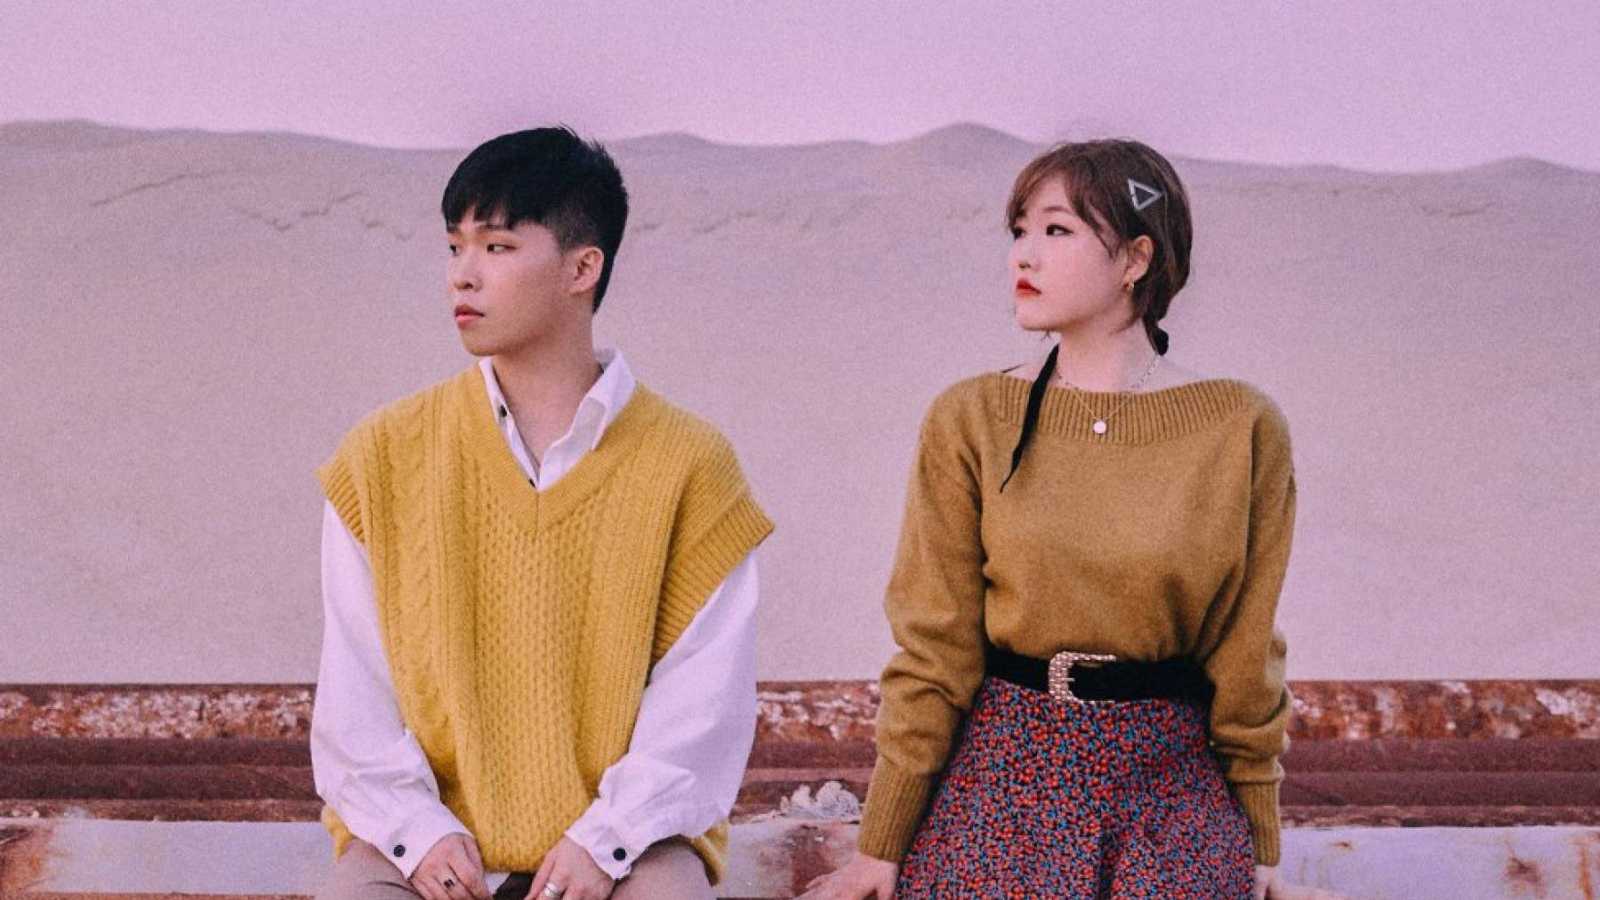 Akdong Musician © YG Entertainment. All rights reserved